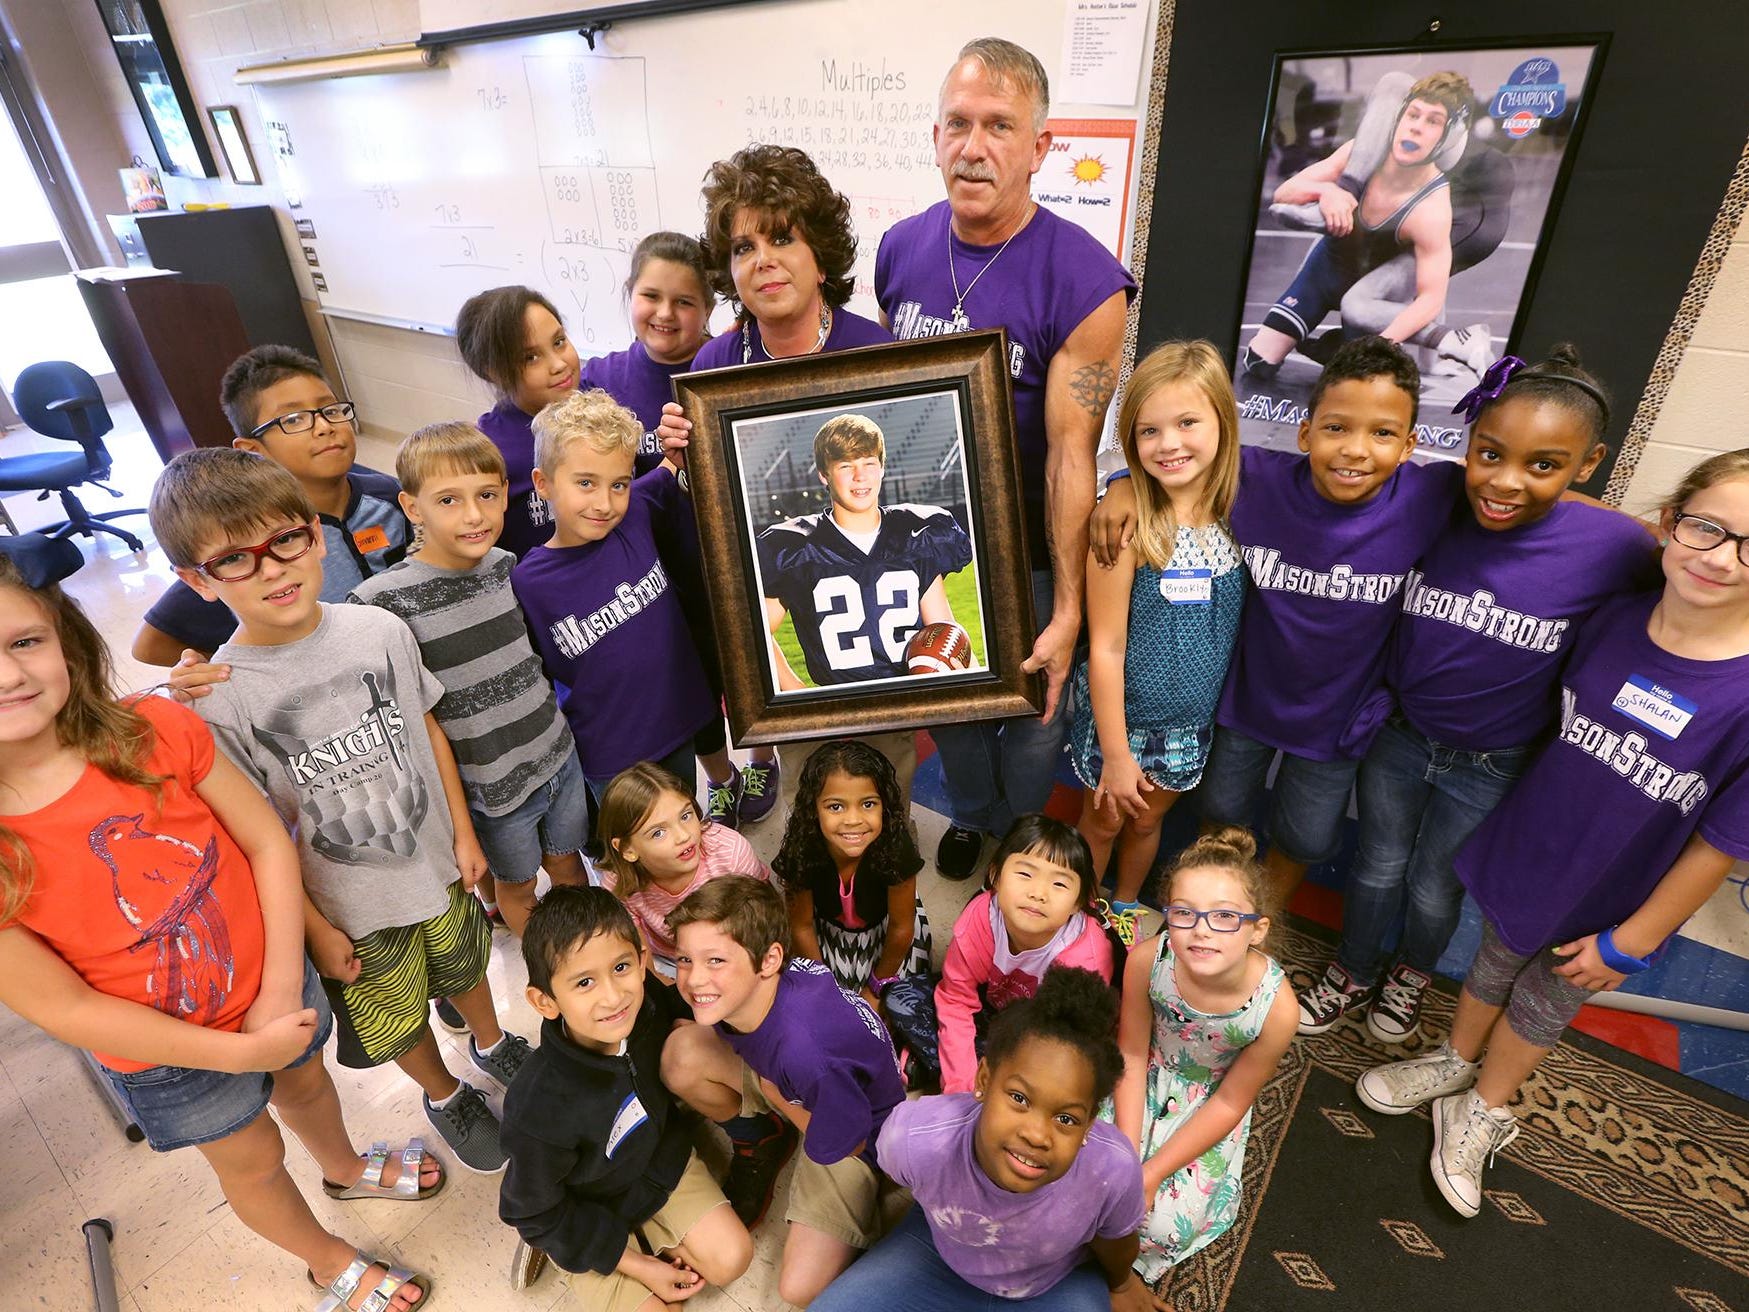 Melanie Heston and her husband, John Heston, hold a photograph of her son, Mason, who died last year. They are surrounded by her third-grade class at Scales Elementary.